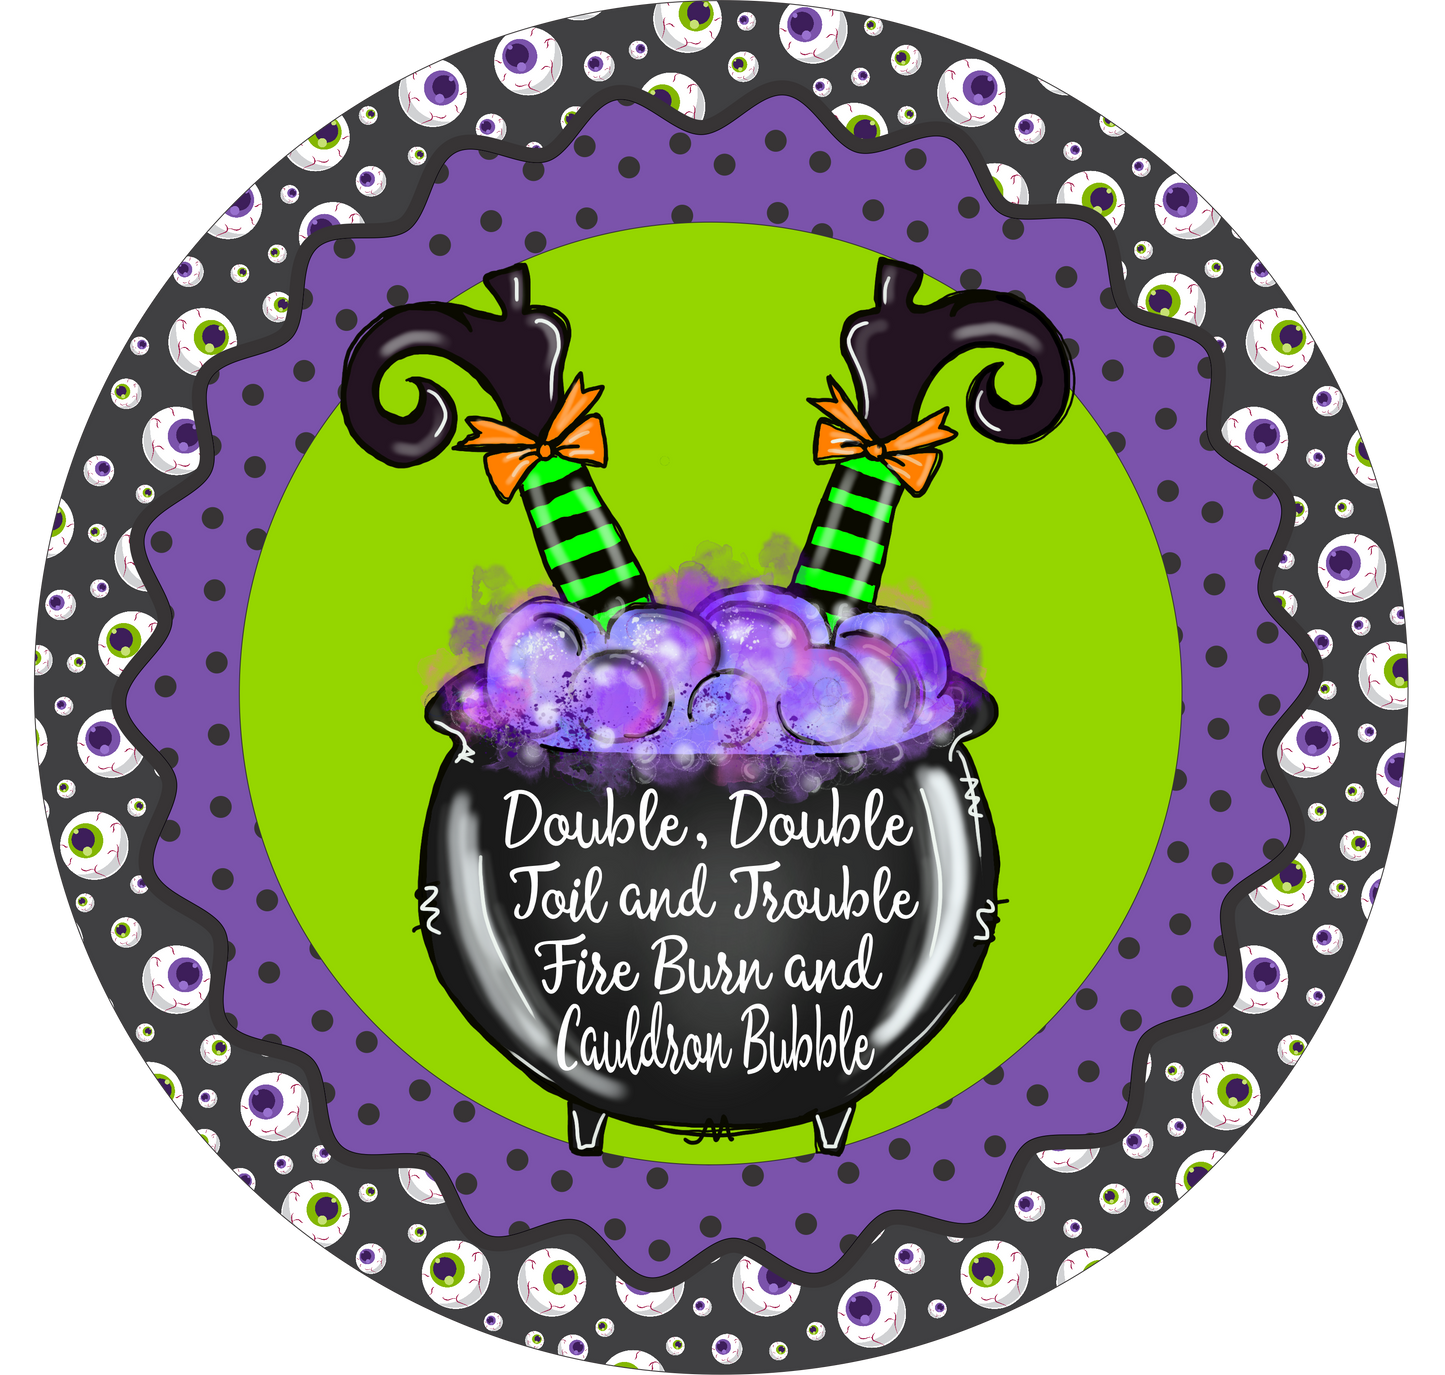 Double, double toil and trouble halloween sign